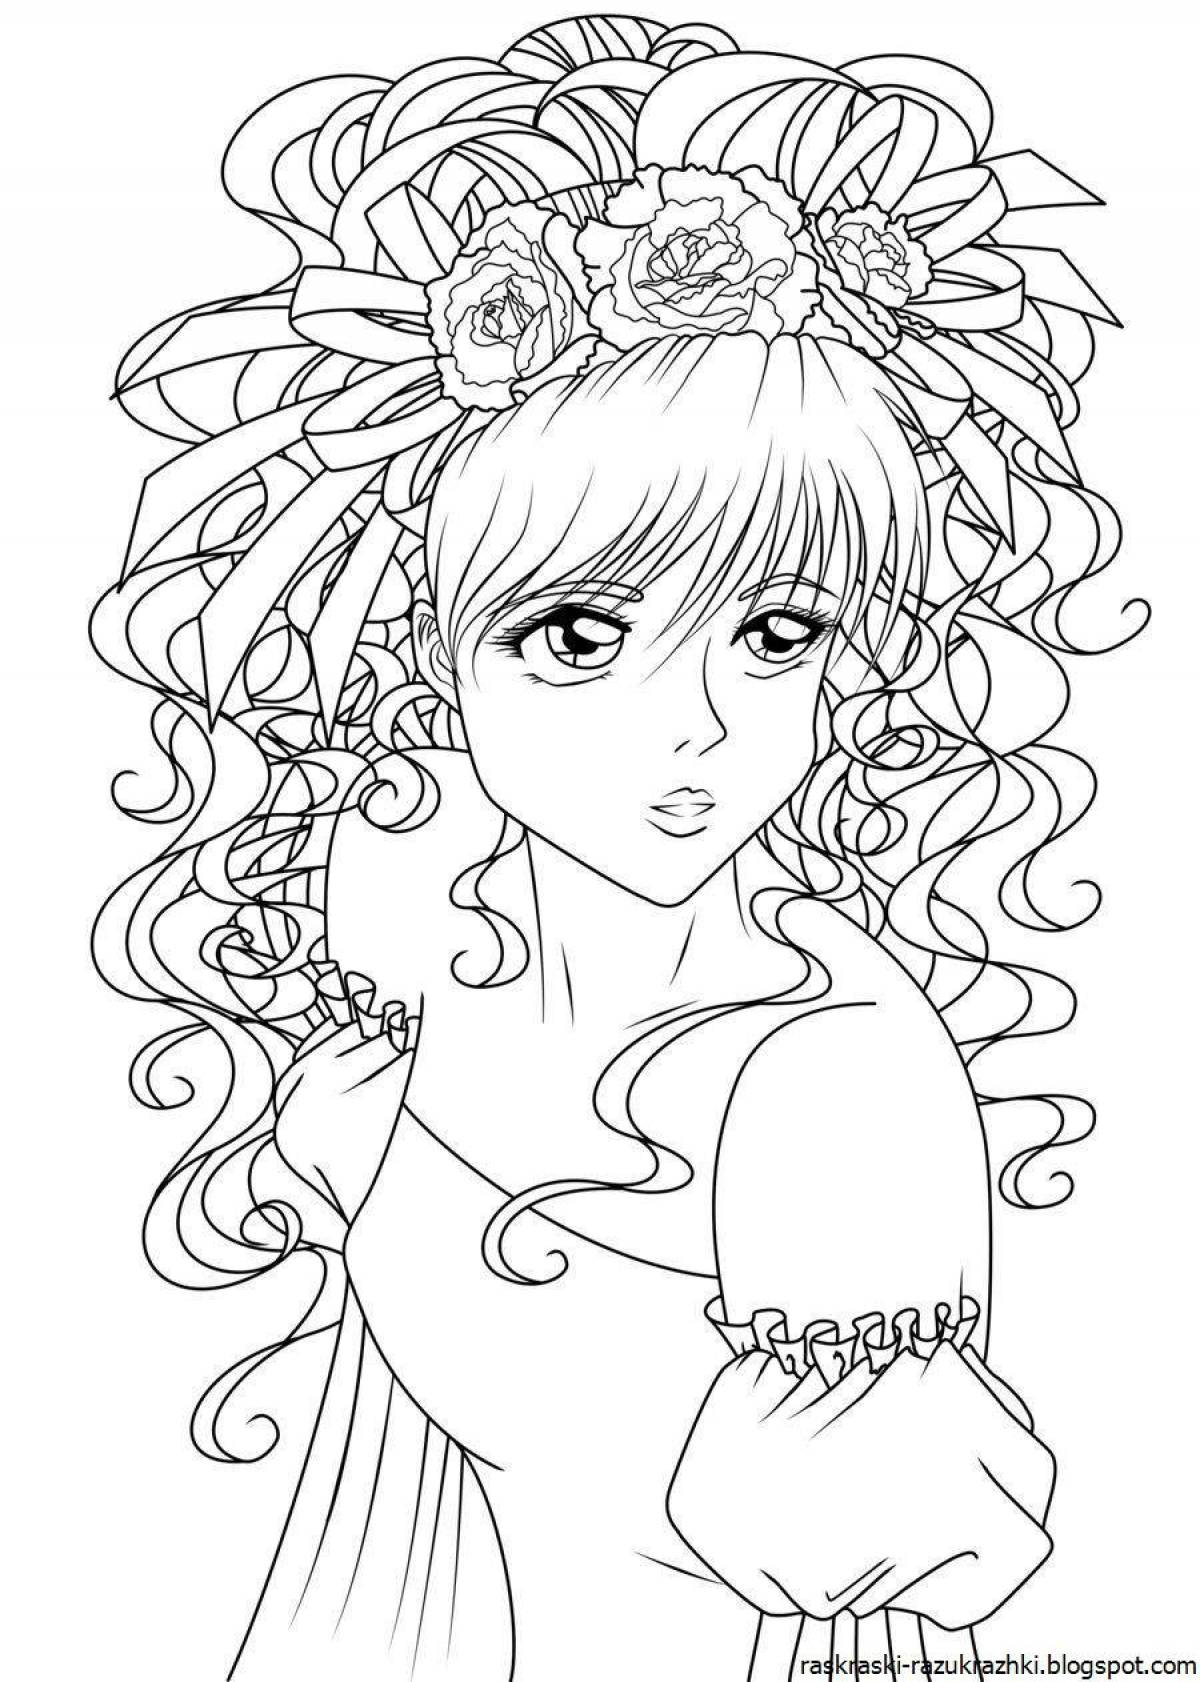 Exalted coloring pages for girls 12 years beautiful